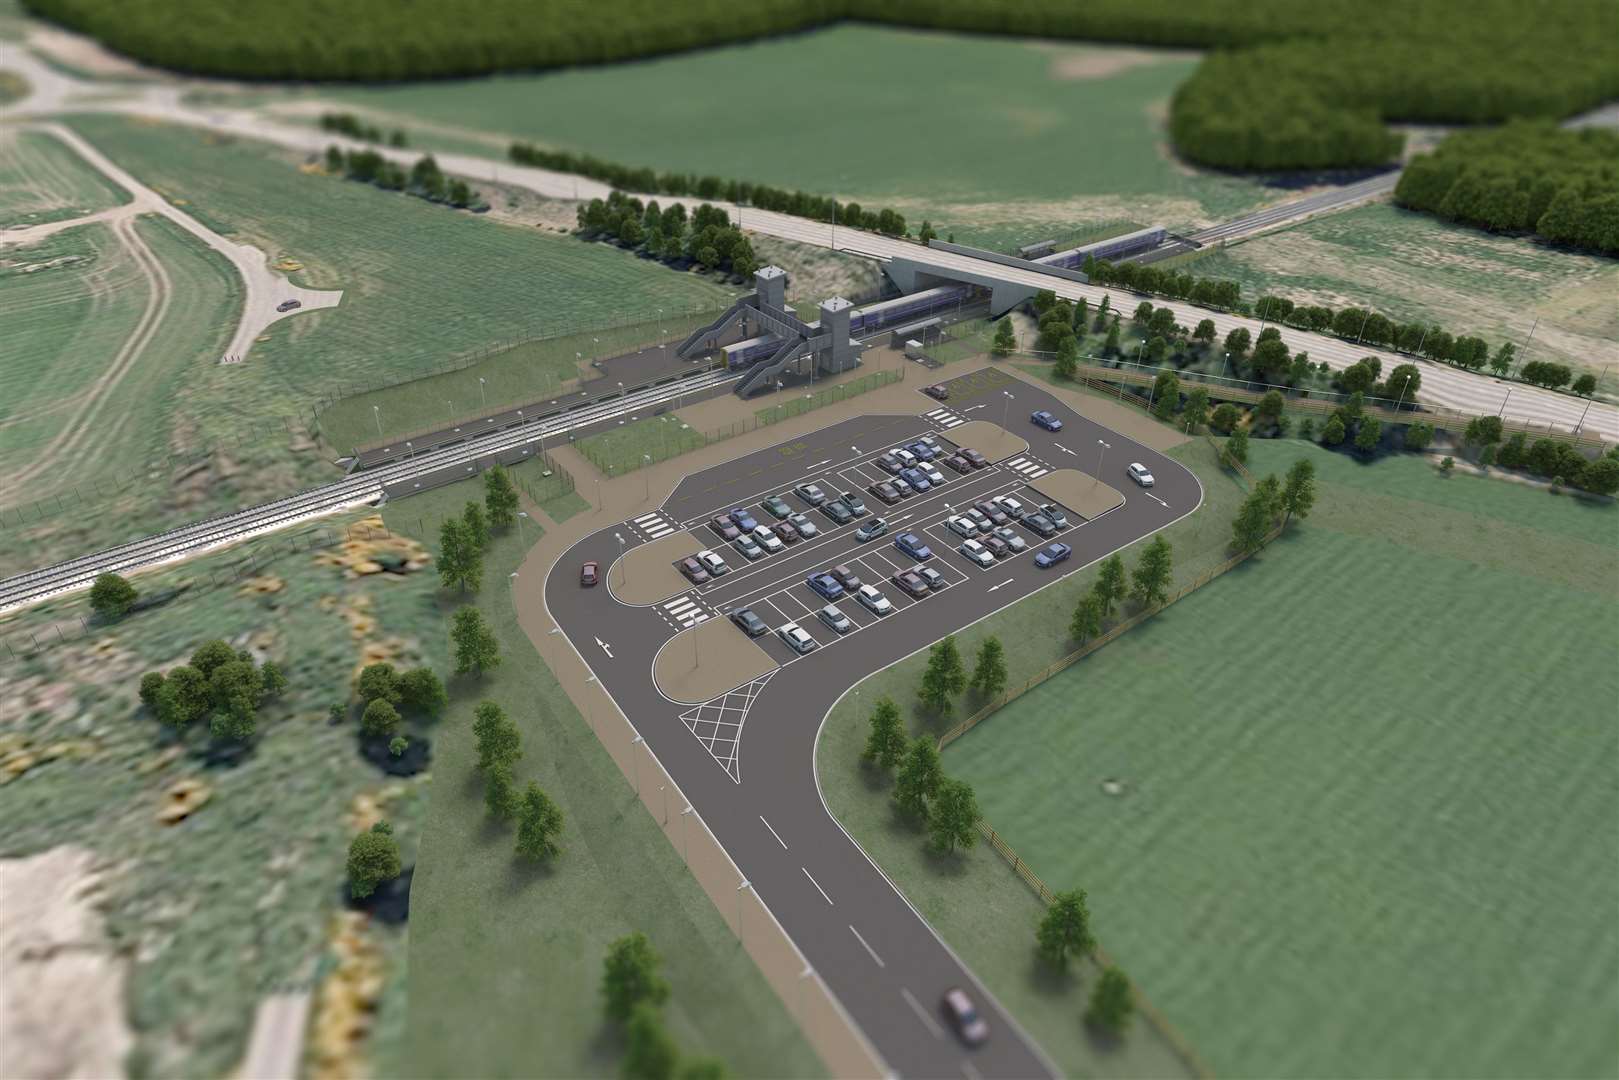 An artist's impression of the planned new railway station at Dalcross, next to Inverness Airport. Picture: Network Rail